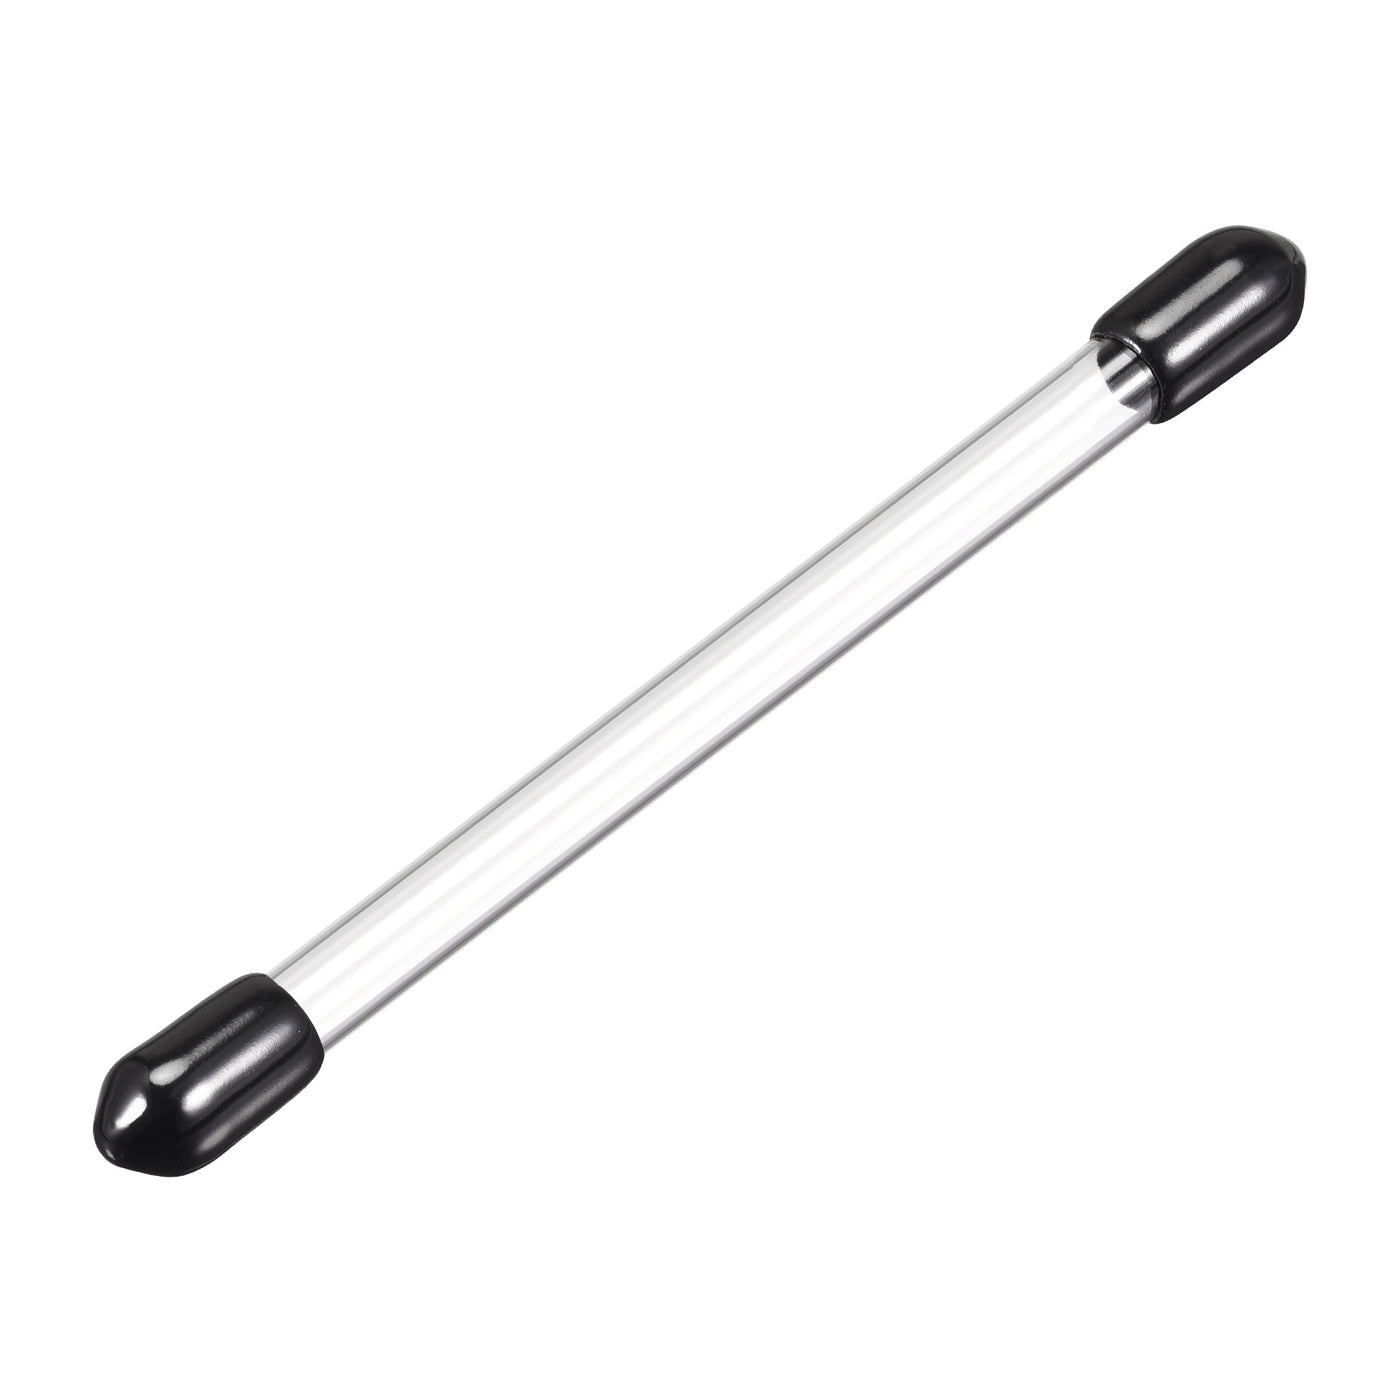 uxcell Uxcell Polycarbonate Rigid Round Clear Tubing 4mm(0.16 Inch)IDx5mm(0.2 Inch)ODx148mm(0.48Ft) Length Plastic Storage Transparent Tube with Black Lids 3pcs